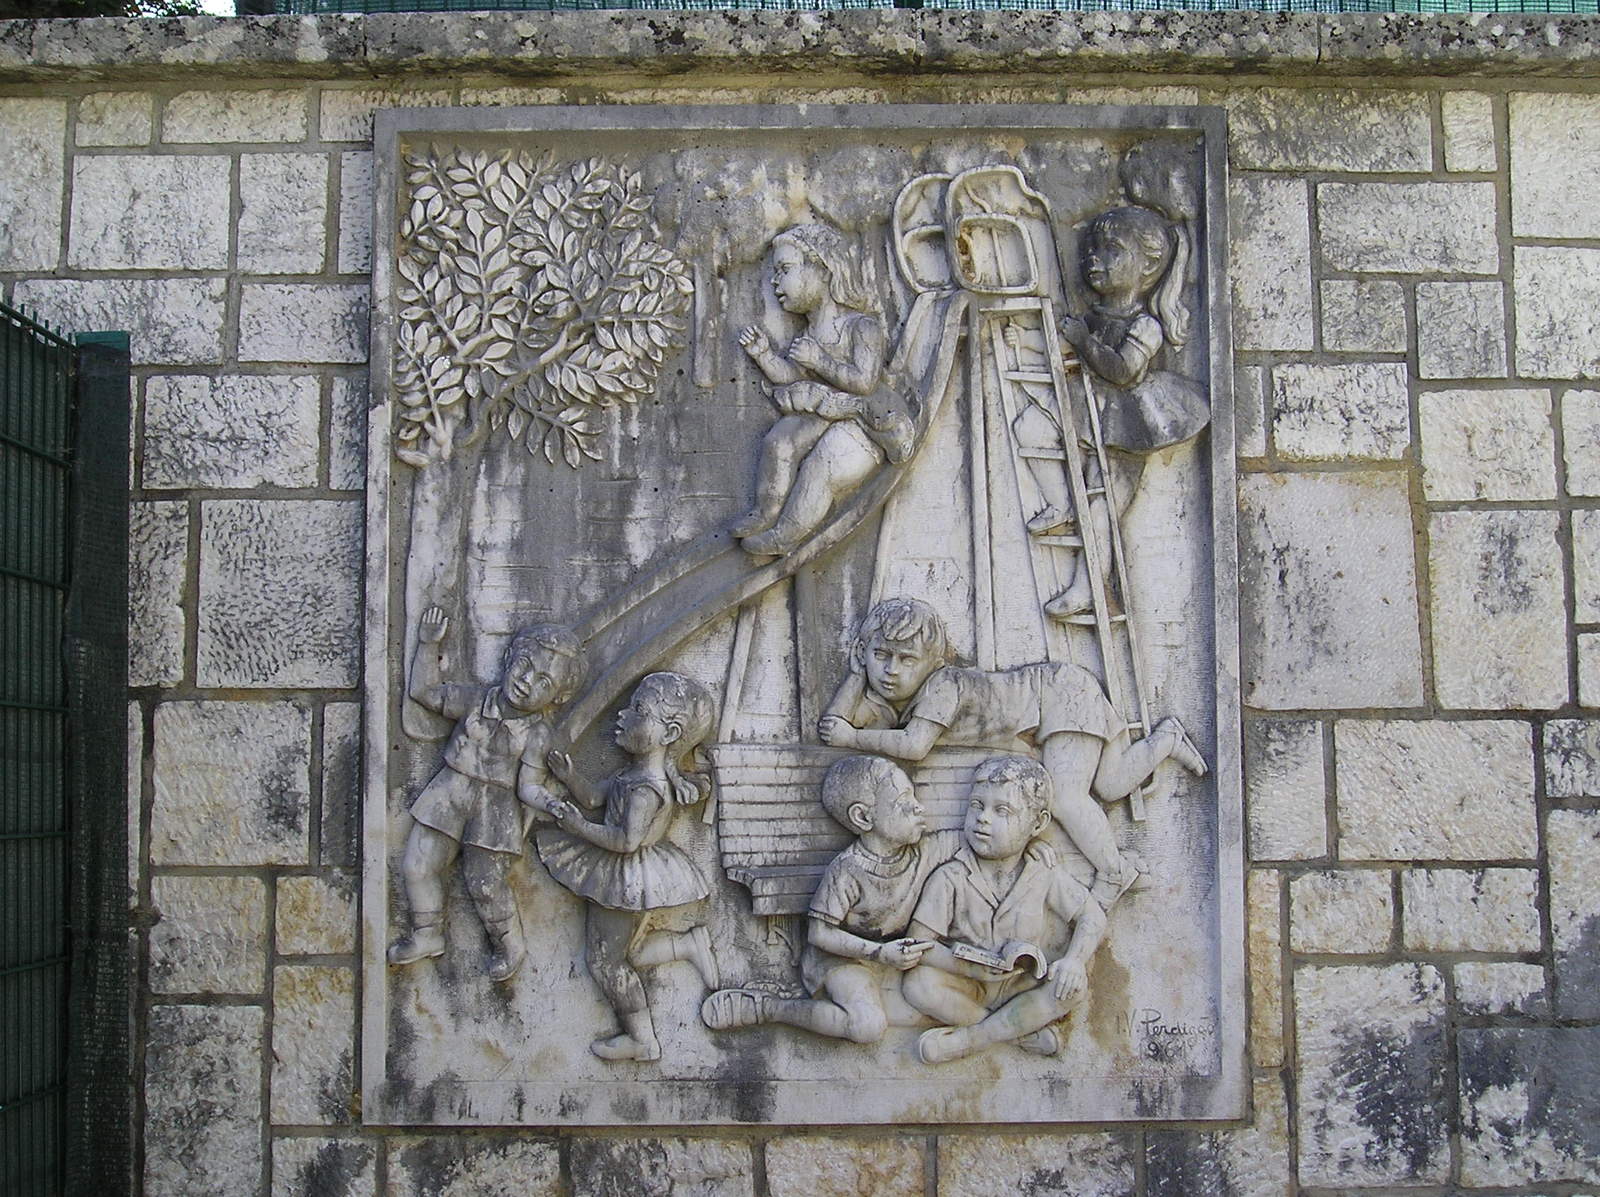 a relief depicting several people, such as an elephant, playing music